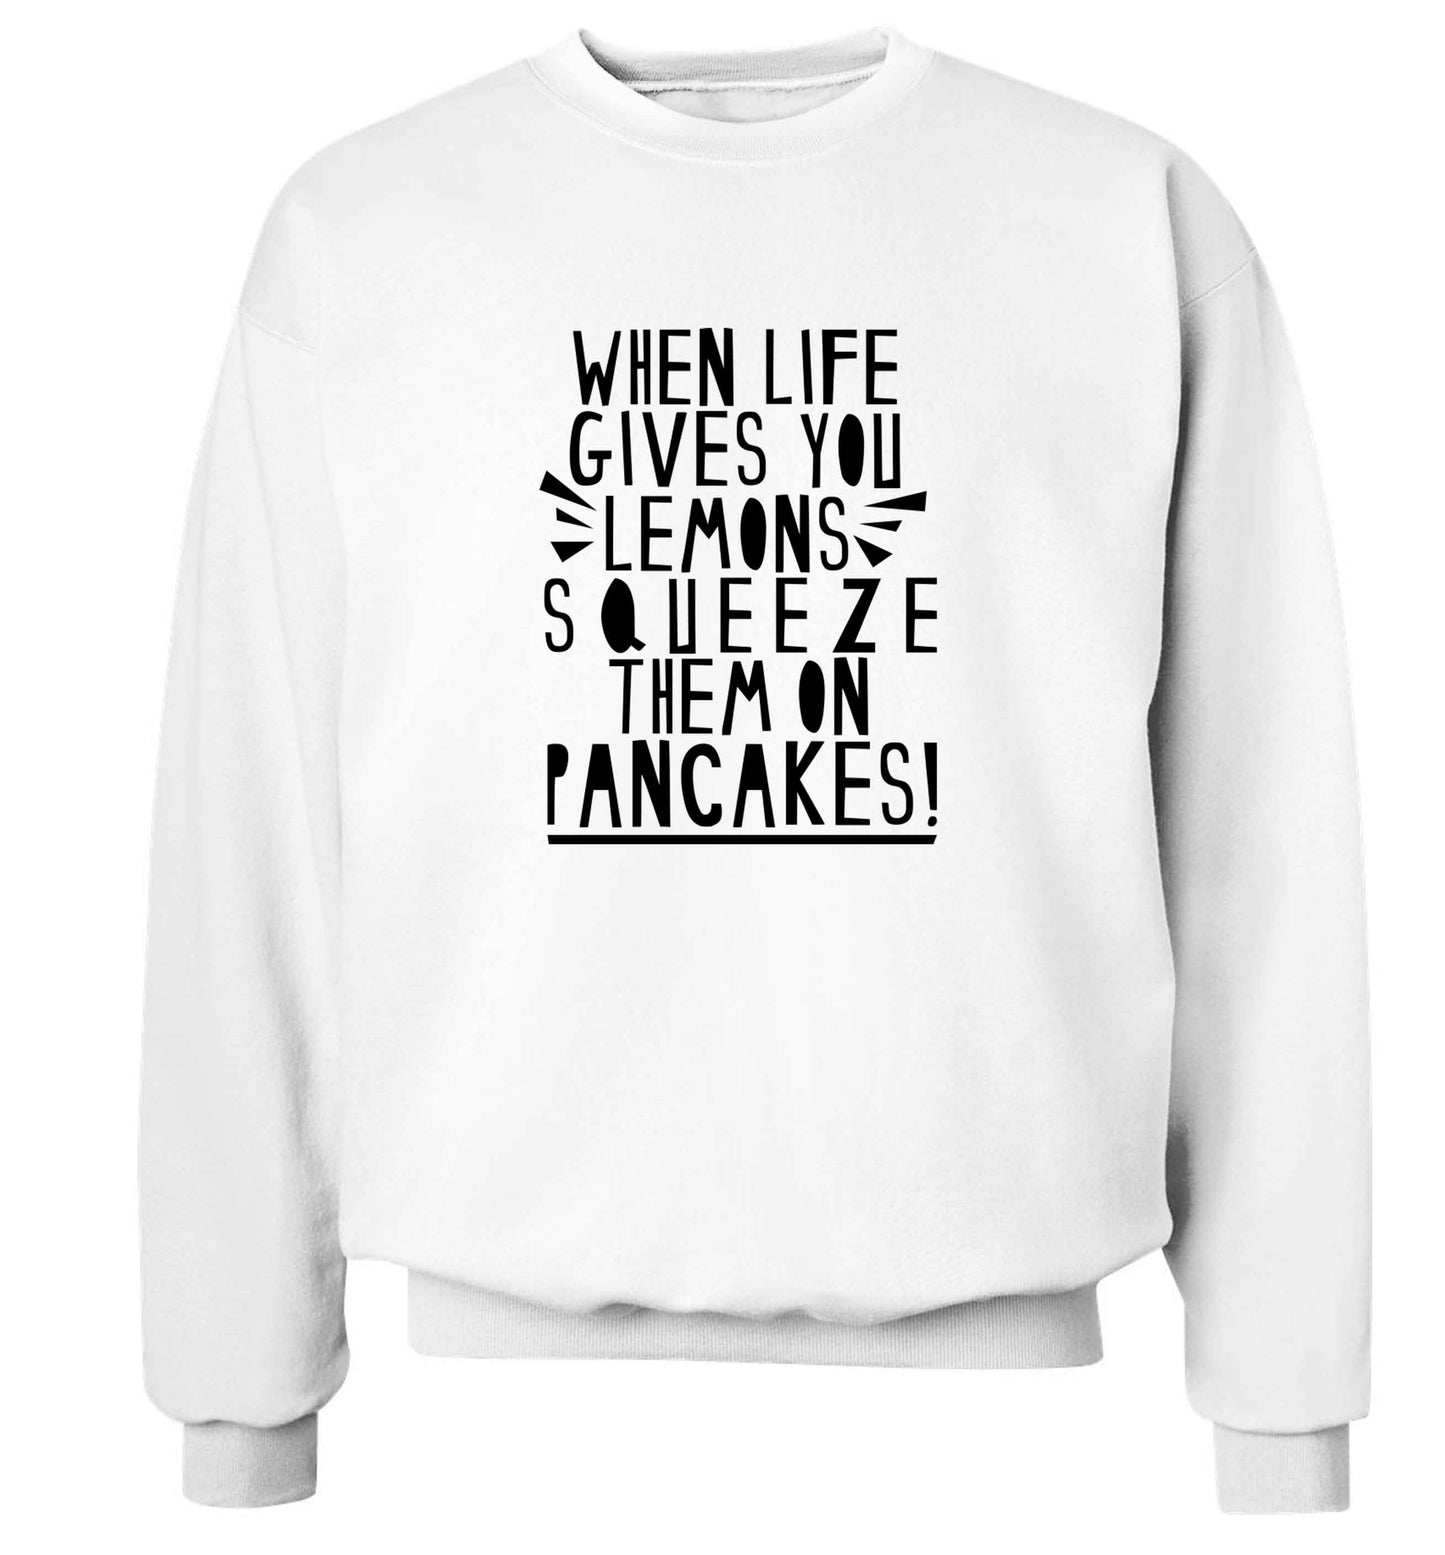 When life gives you lemons squeeze them on pancakes! adult's unisex white sweater 2XL